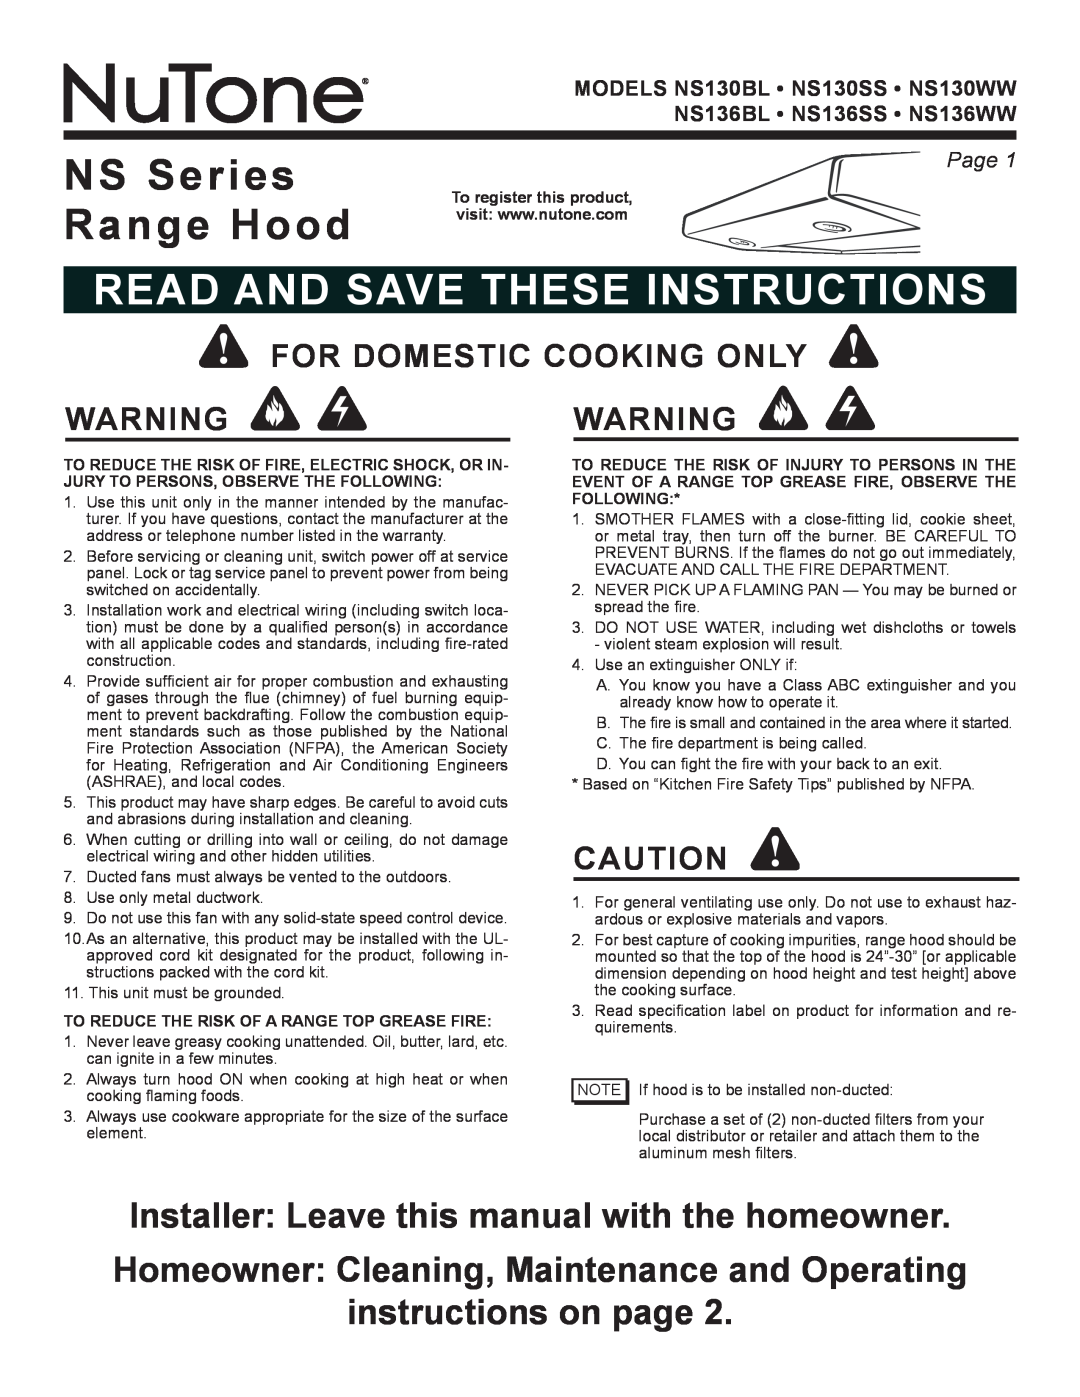 NuTone manual NS Series Range Hood, read and save these instructions, Installer Leave this manual with the homeowner 